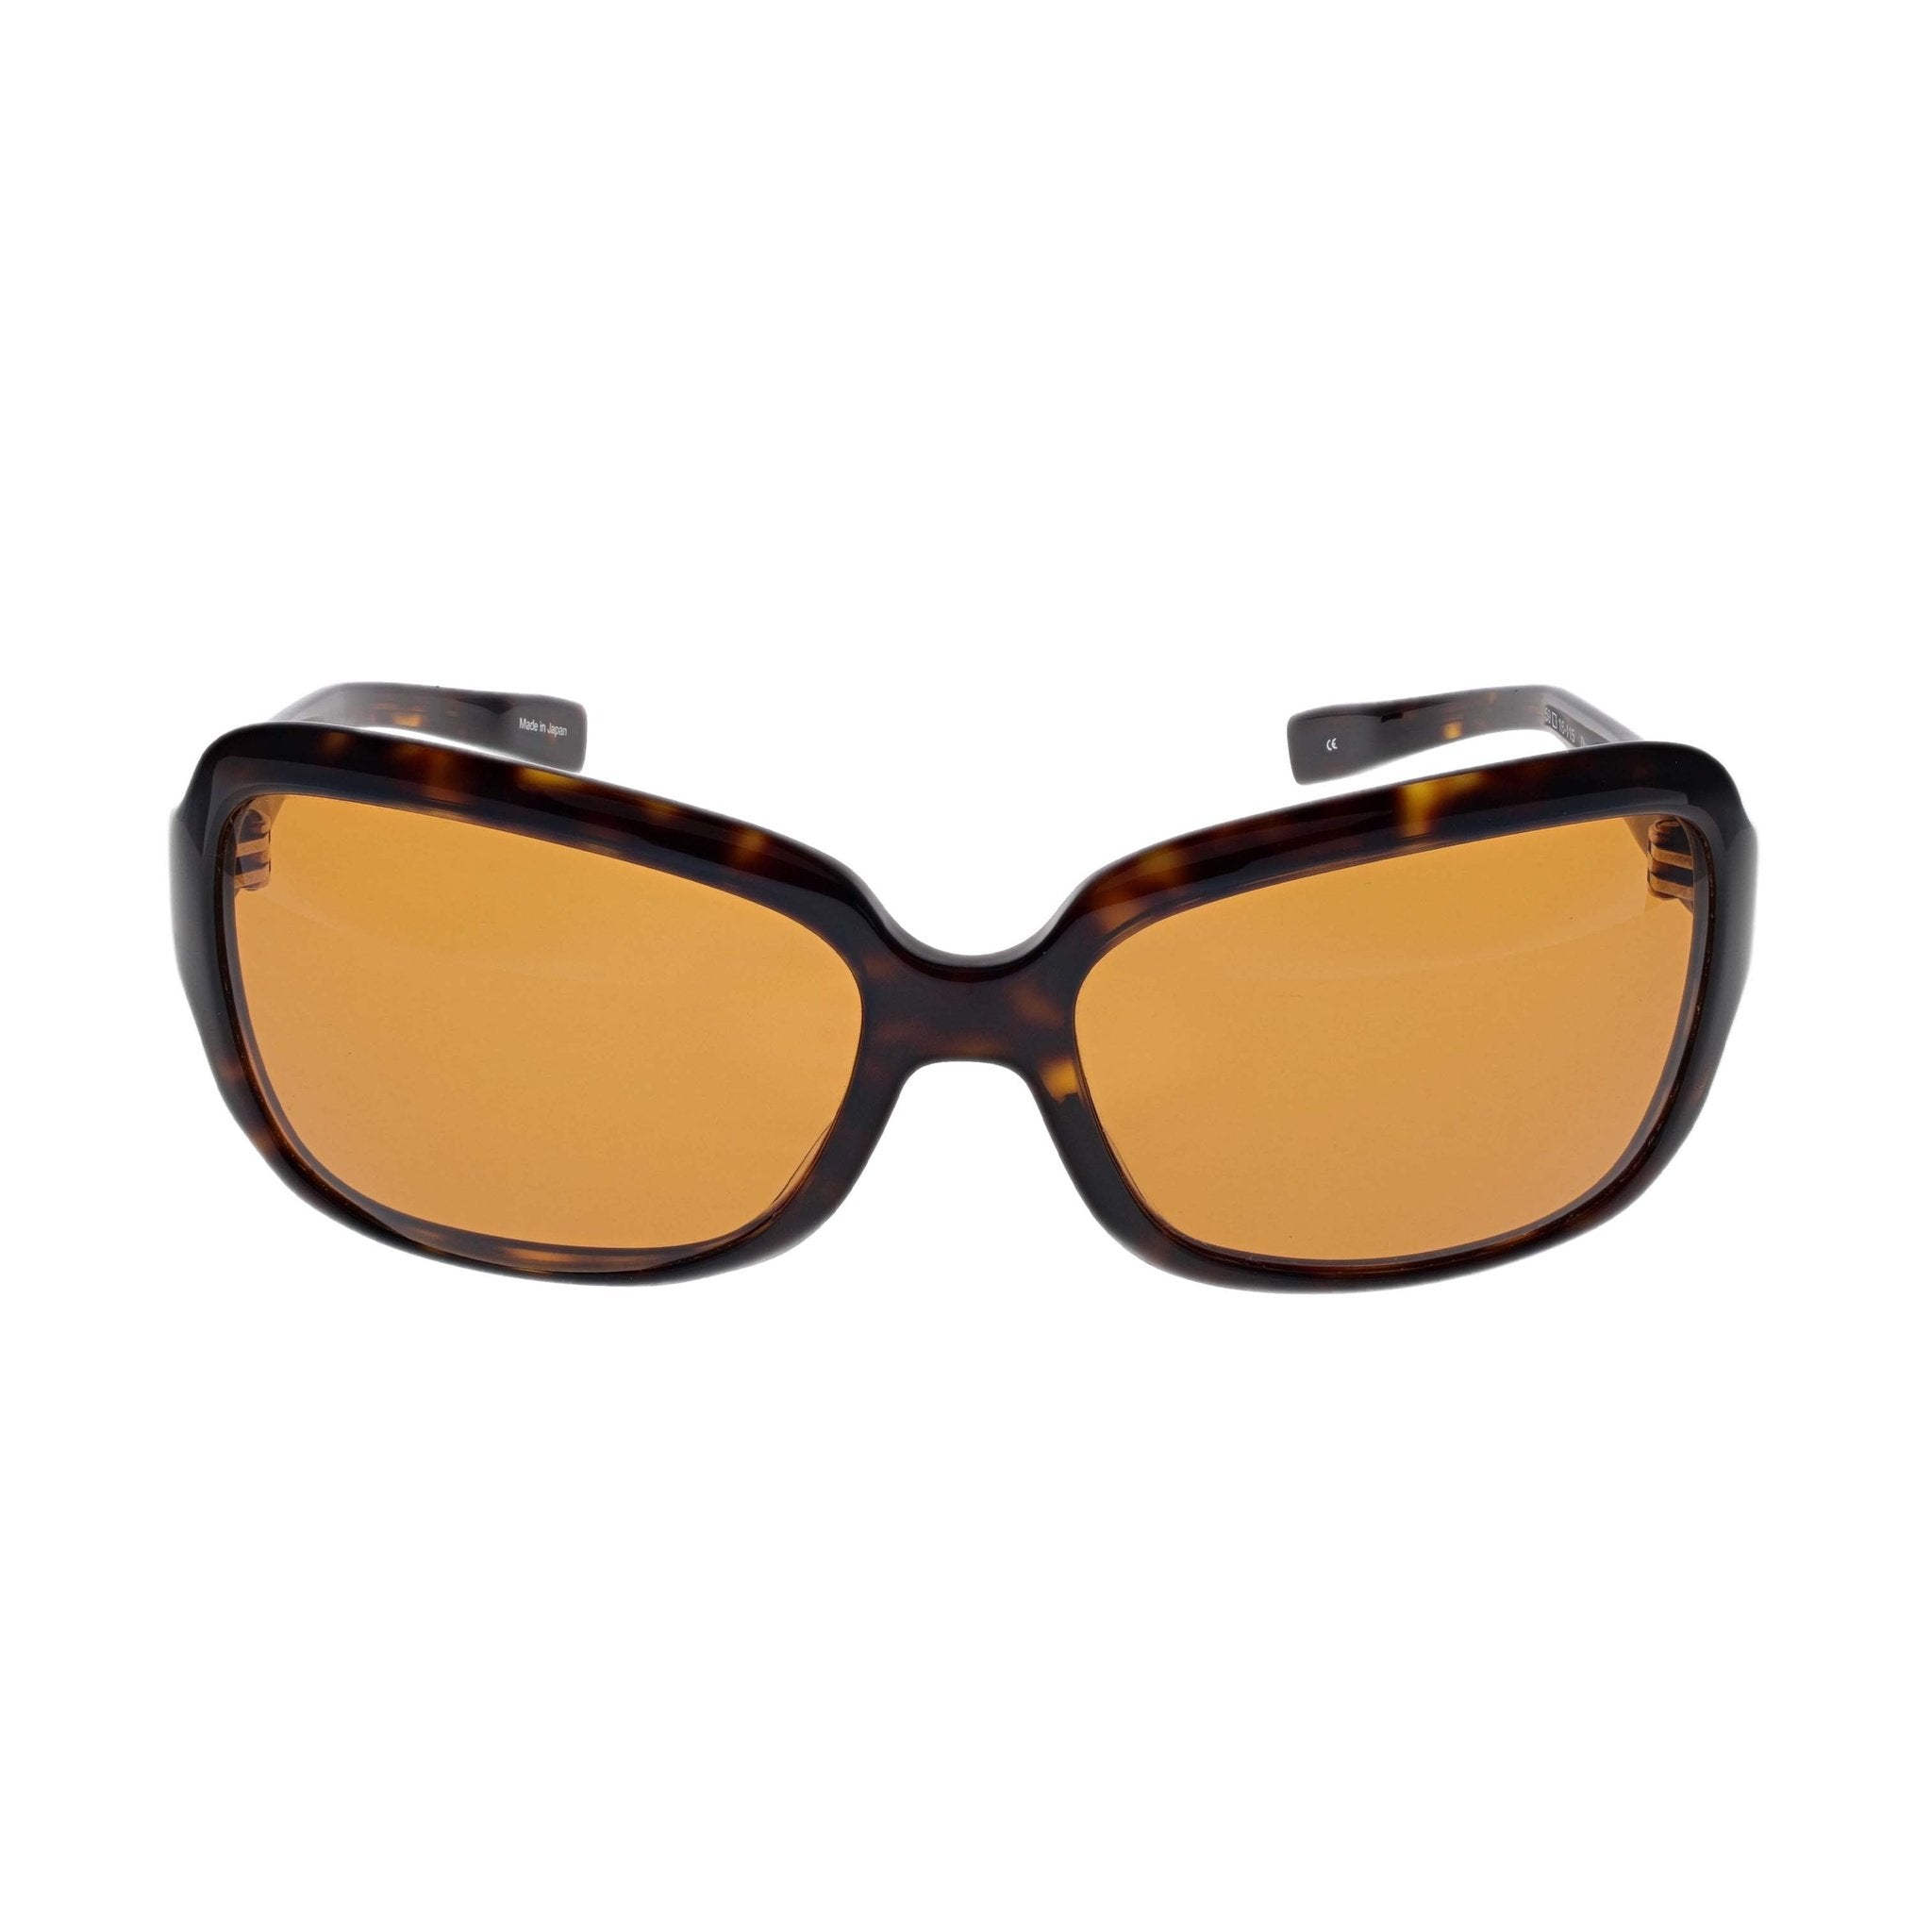 Oliver Peoples Dunaway Sunglasses - 362